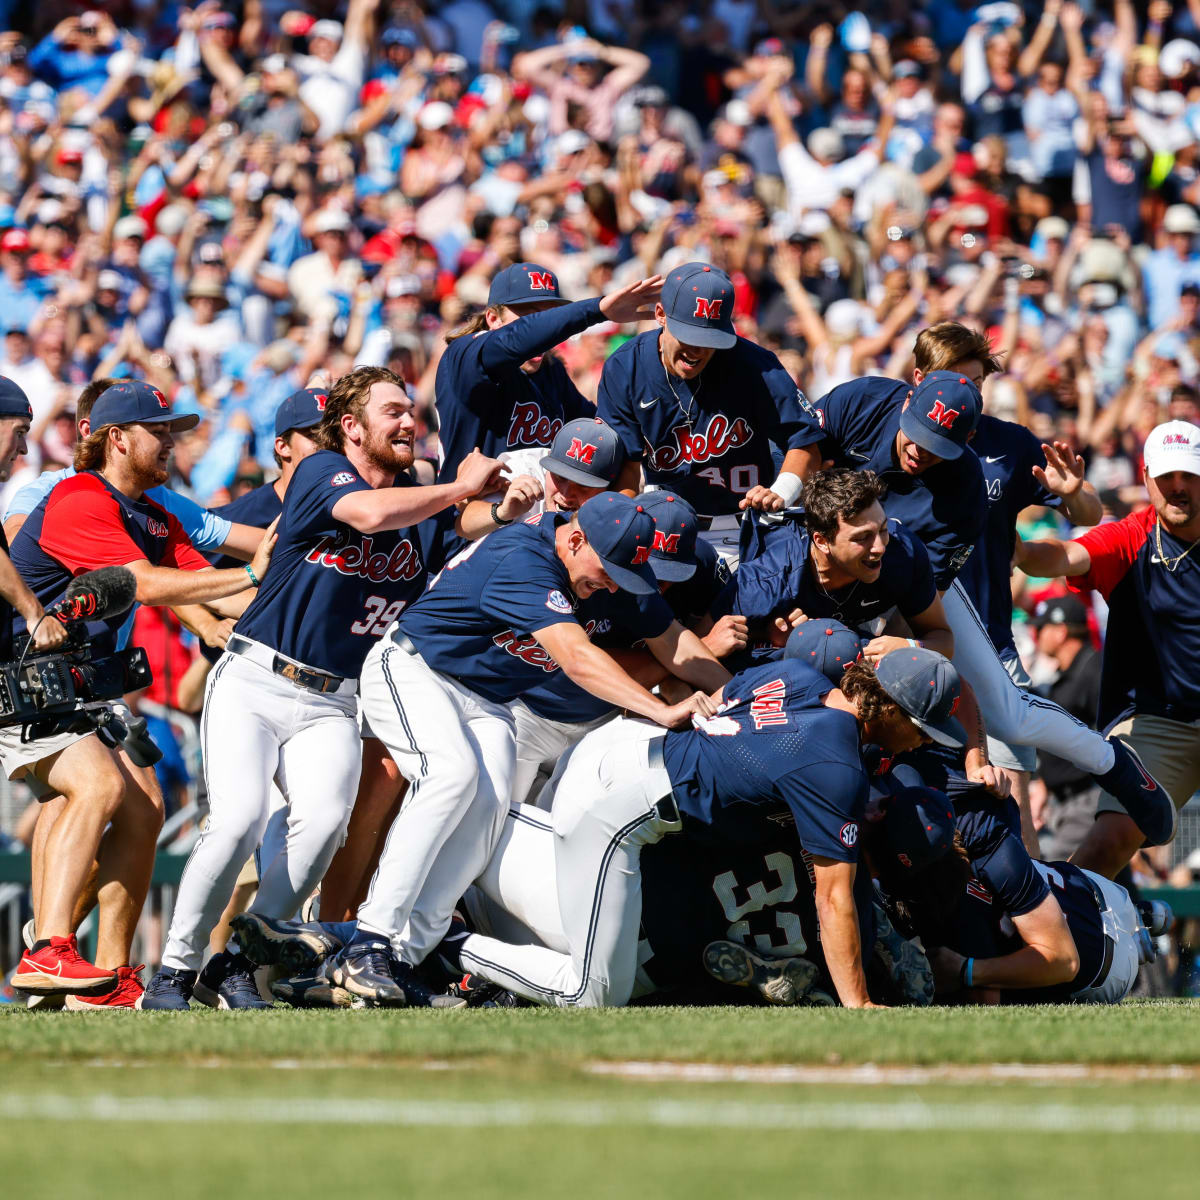 Ole Miss sweeps Oklahoma to win College World Series